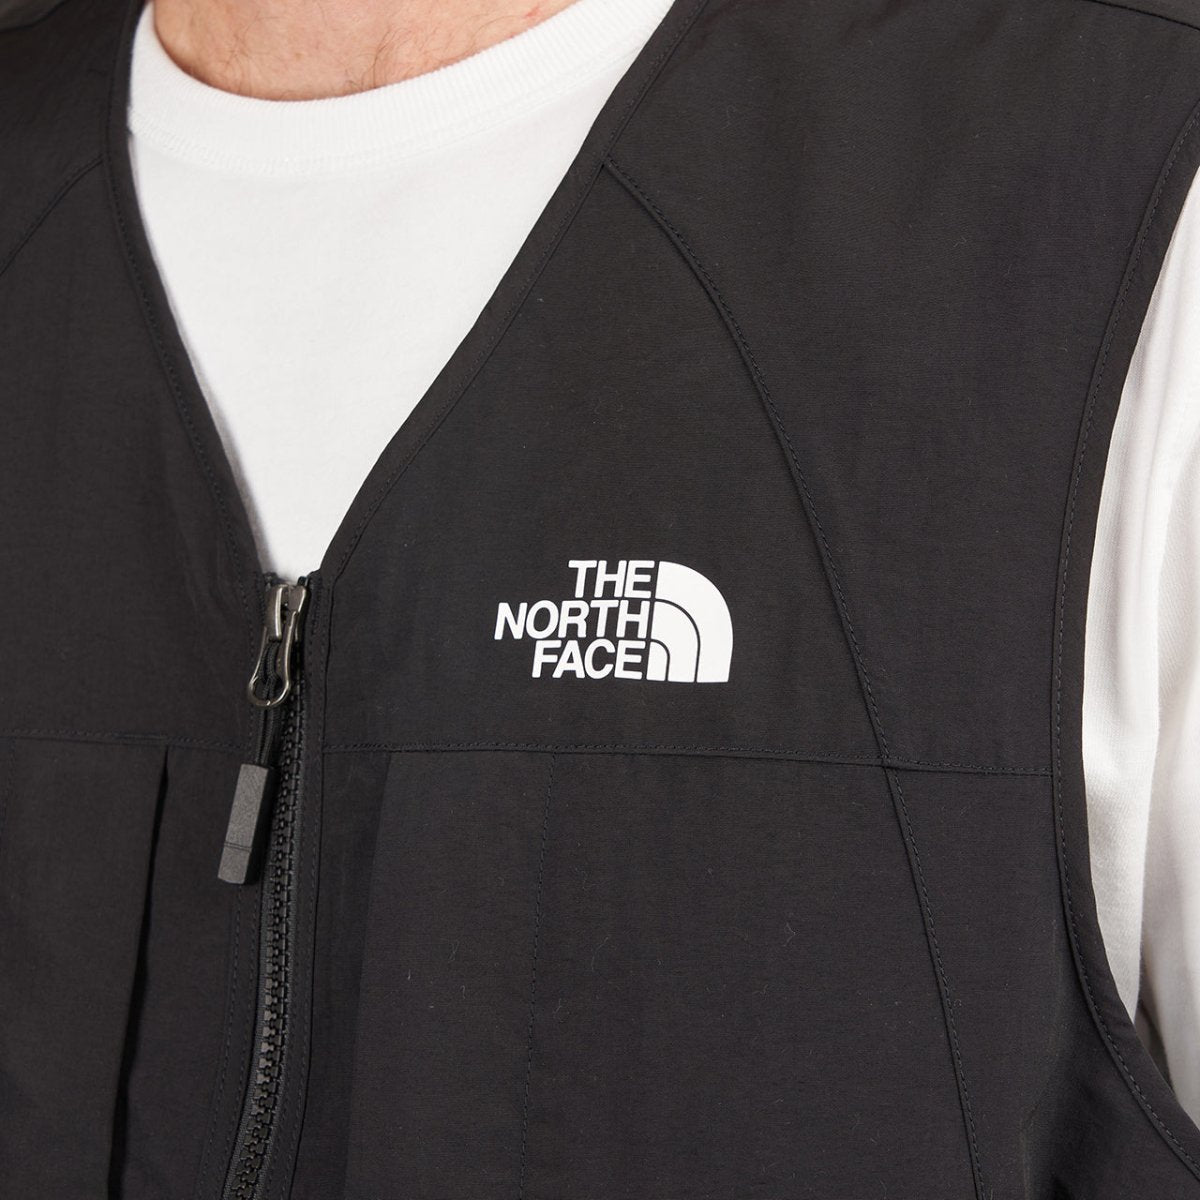 The North Face 2000 Mountain Jacket Black